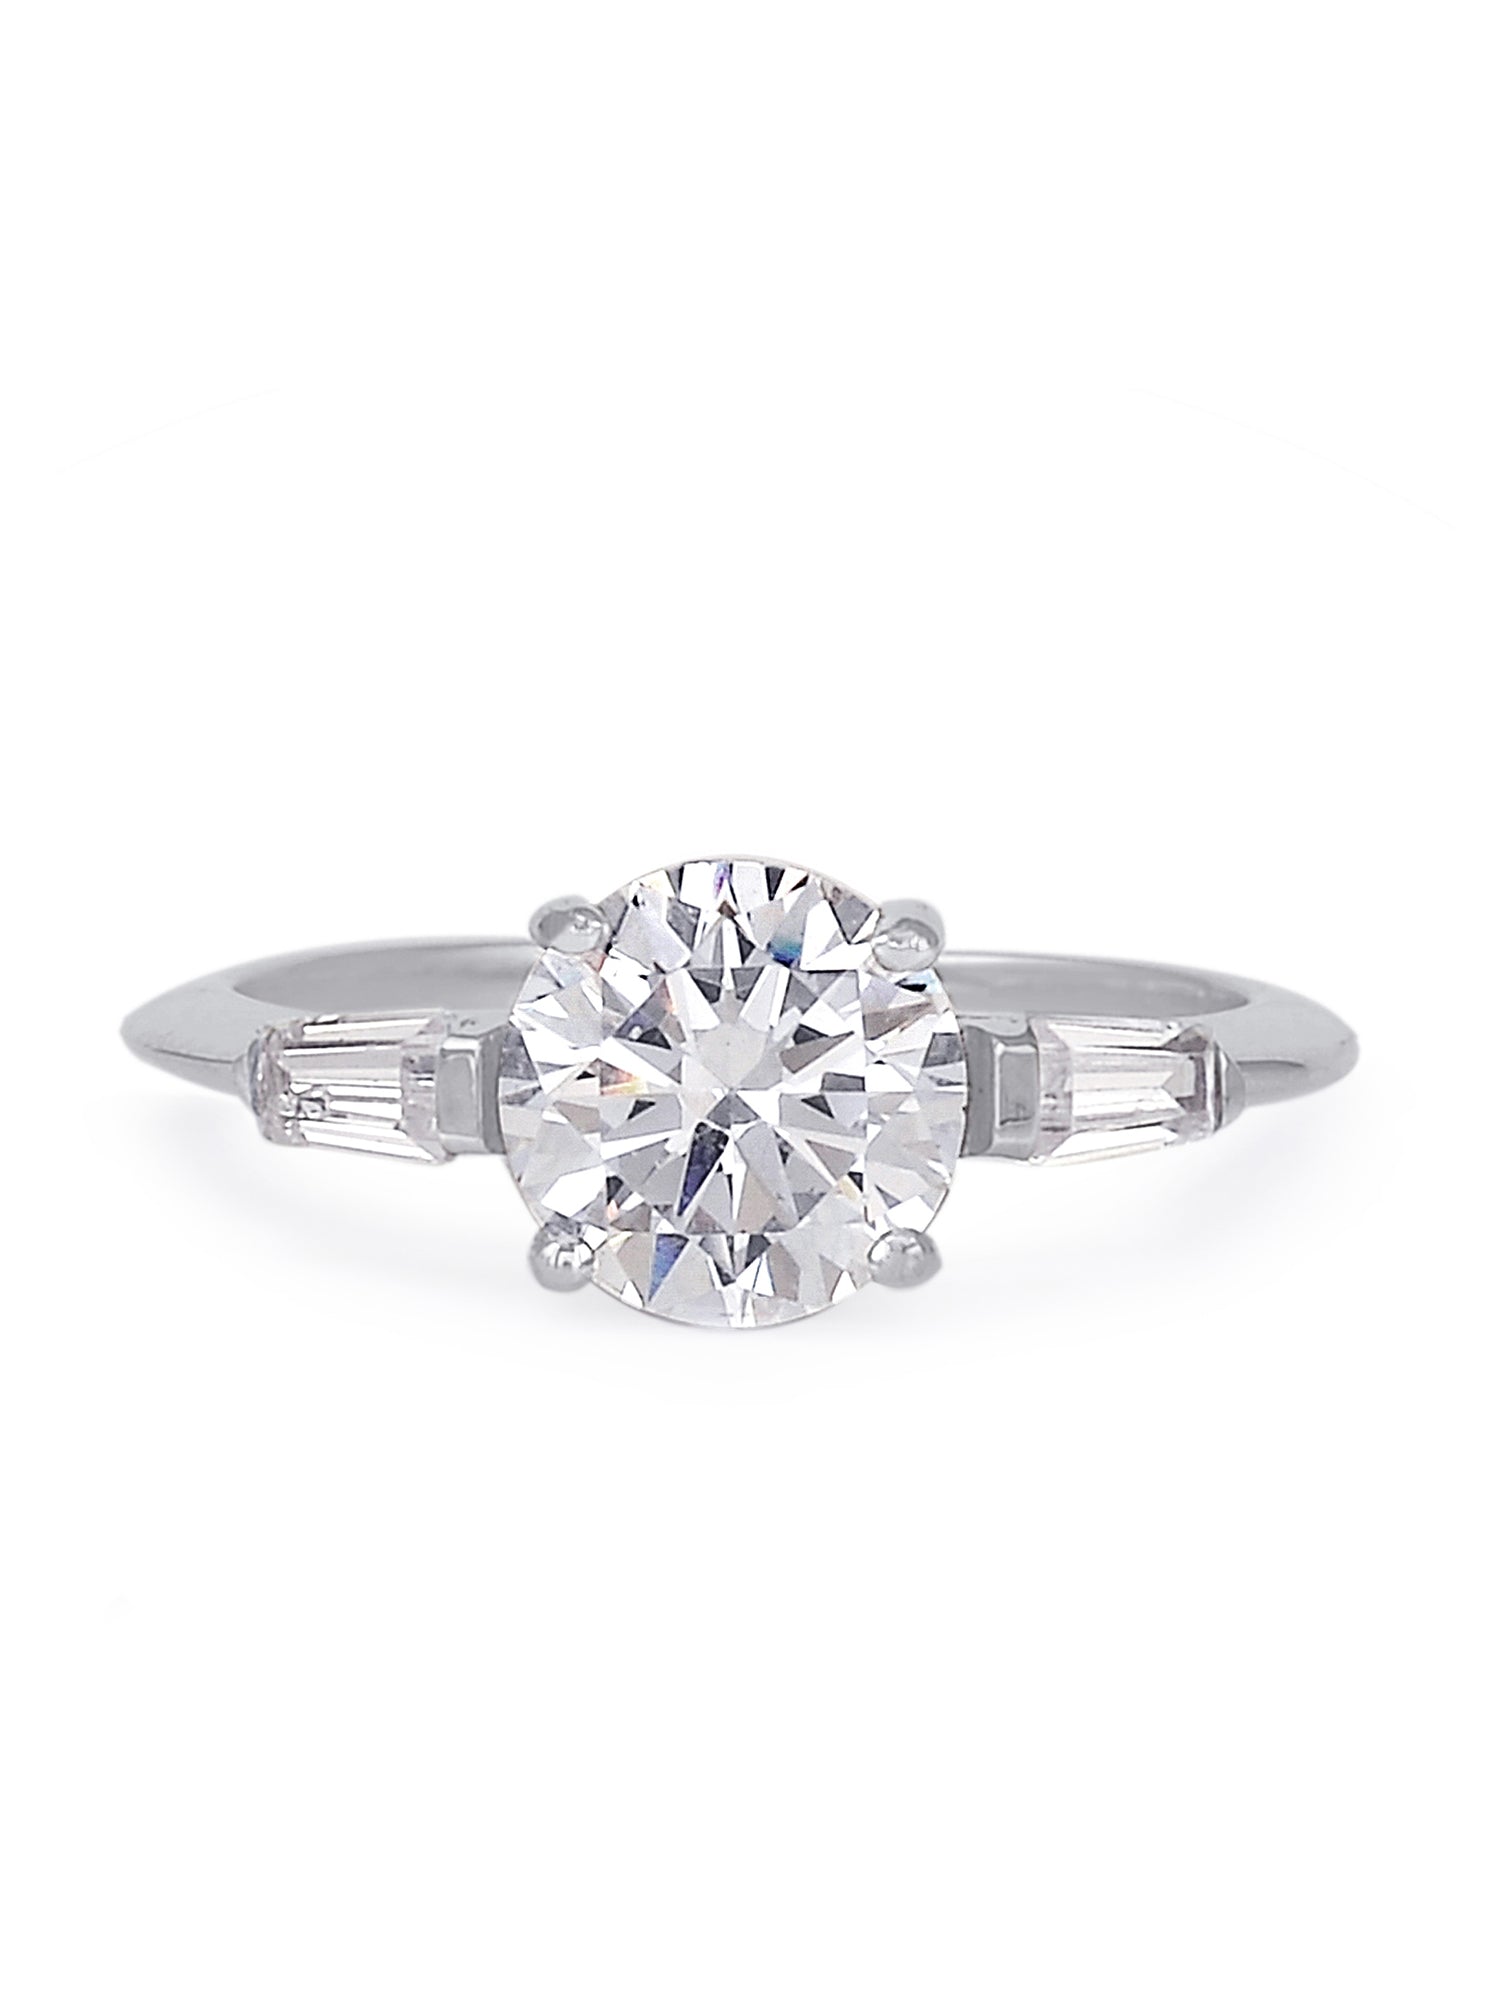 ORNATE 2 CARAT SOLITAIRE RING FOR WOMEN